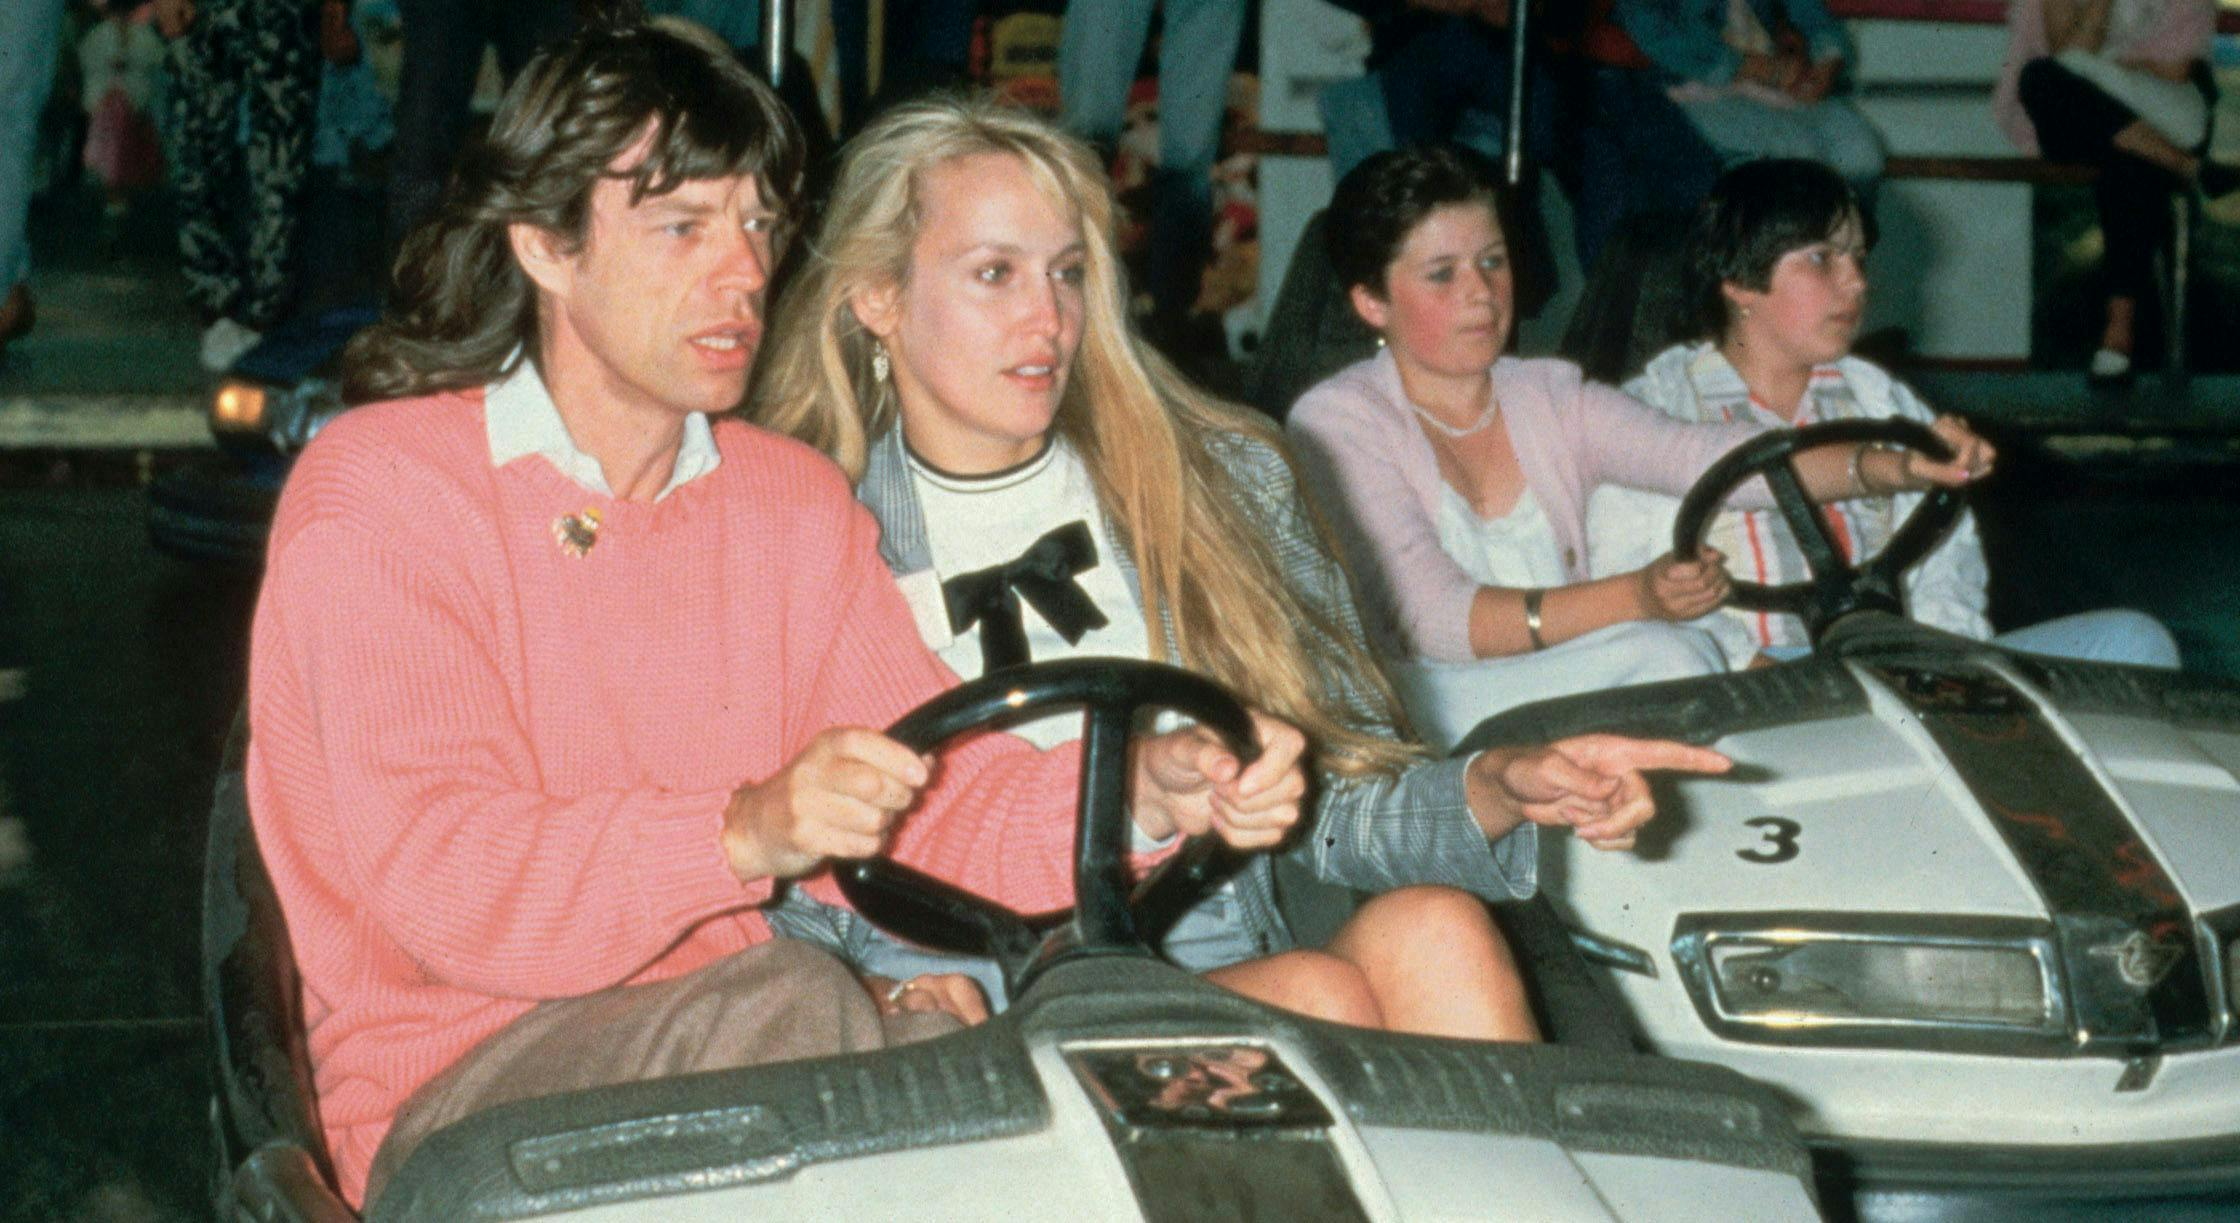 men bumper cars english group of people women recreation girl music mick jagger jerry hall festival american rock music couples caucasian ethnicity prominent persons rolling stones child driving boy person human kart vehicle transportation